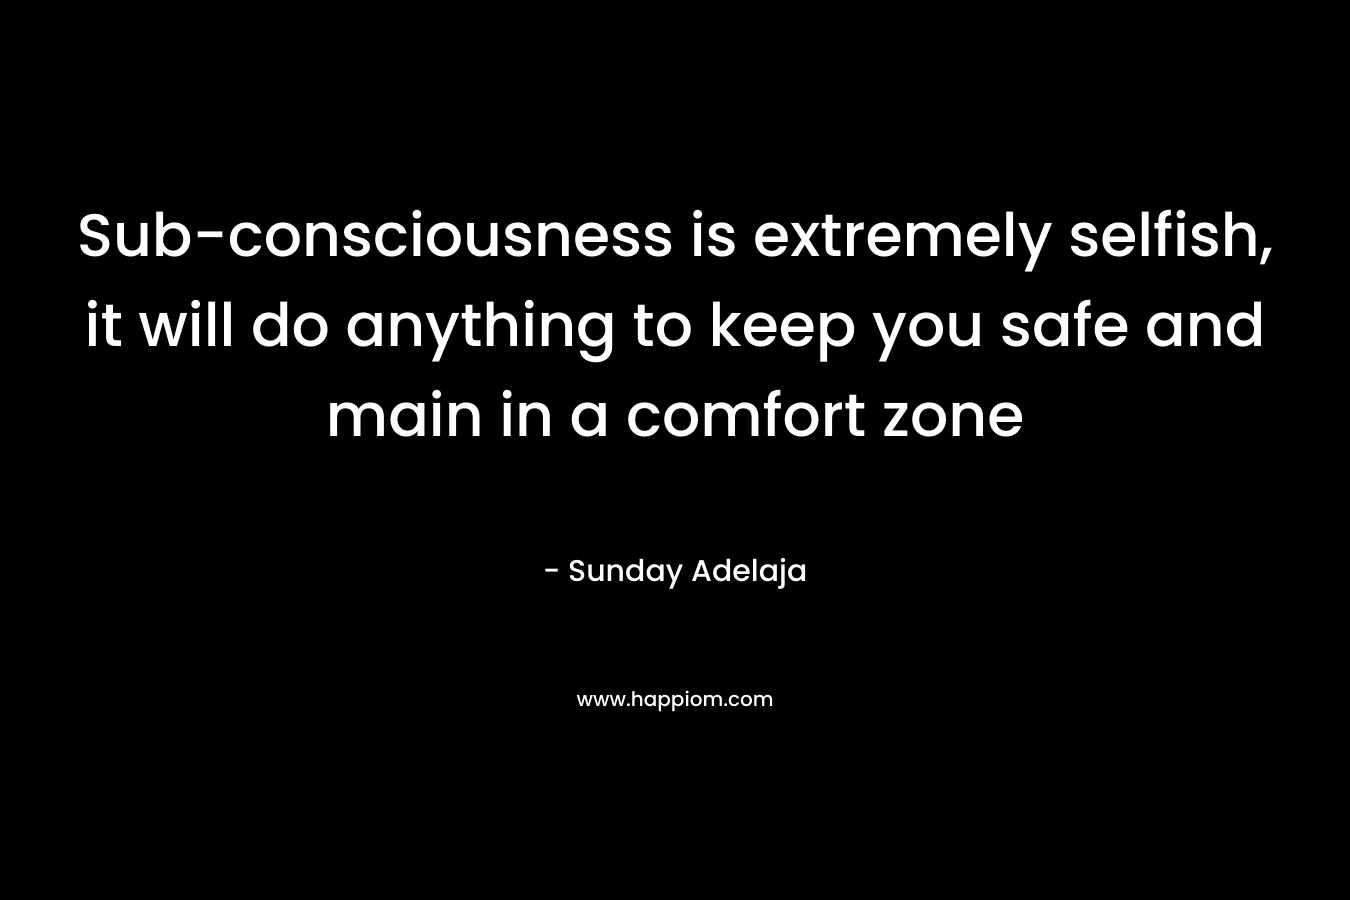 Sub-consciousness is extremely selfish, it will do anything to keep you safe and main in a comfort zone